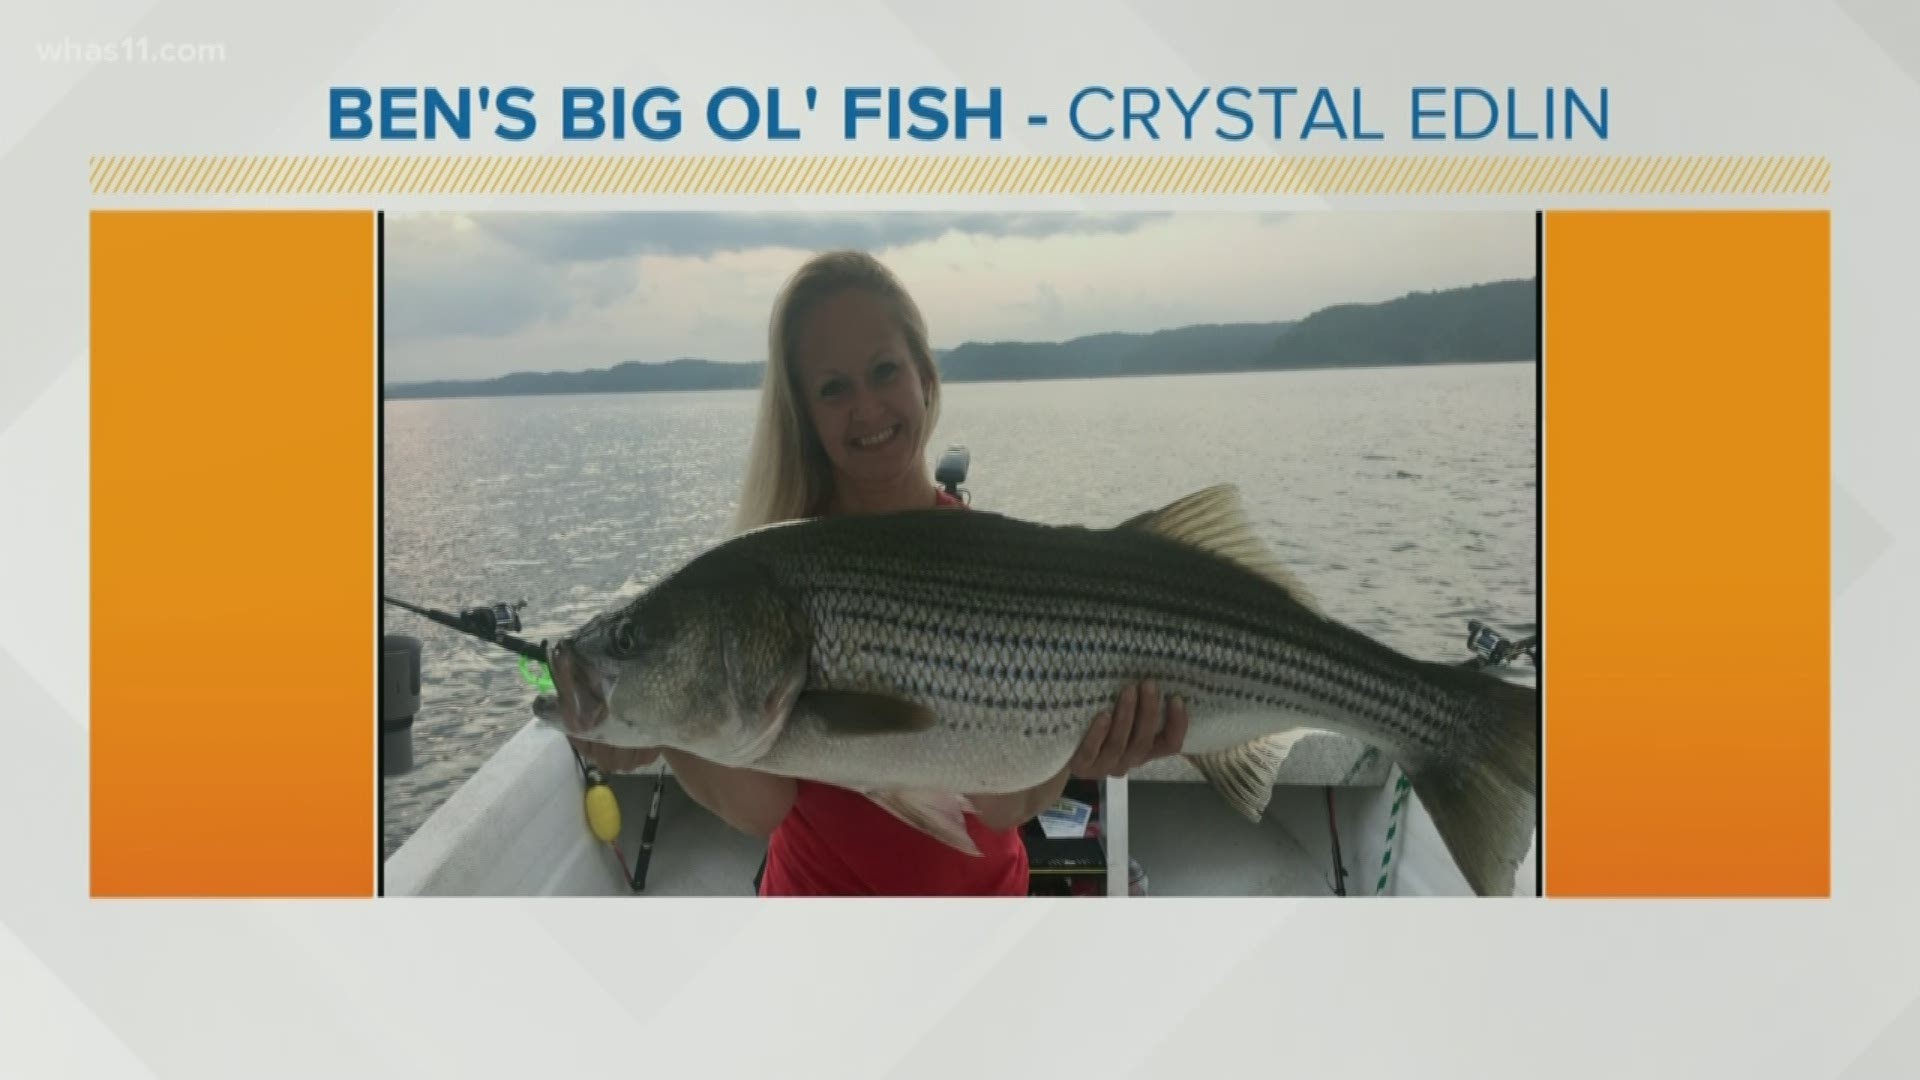 Congrats to Crystal Edlin for having the Big Ol' Fish of the week!